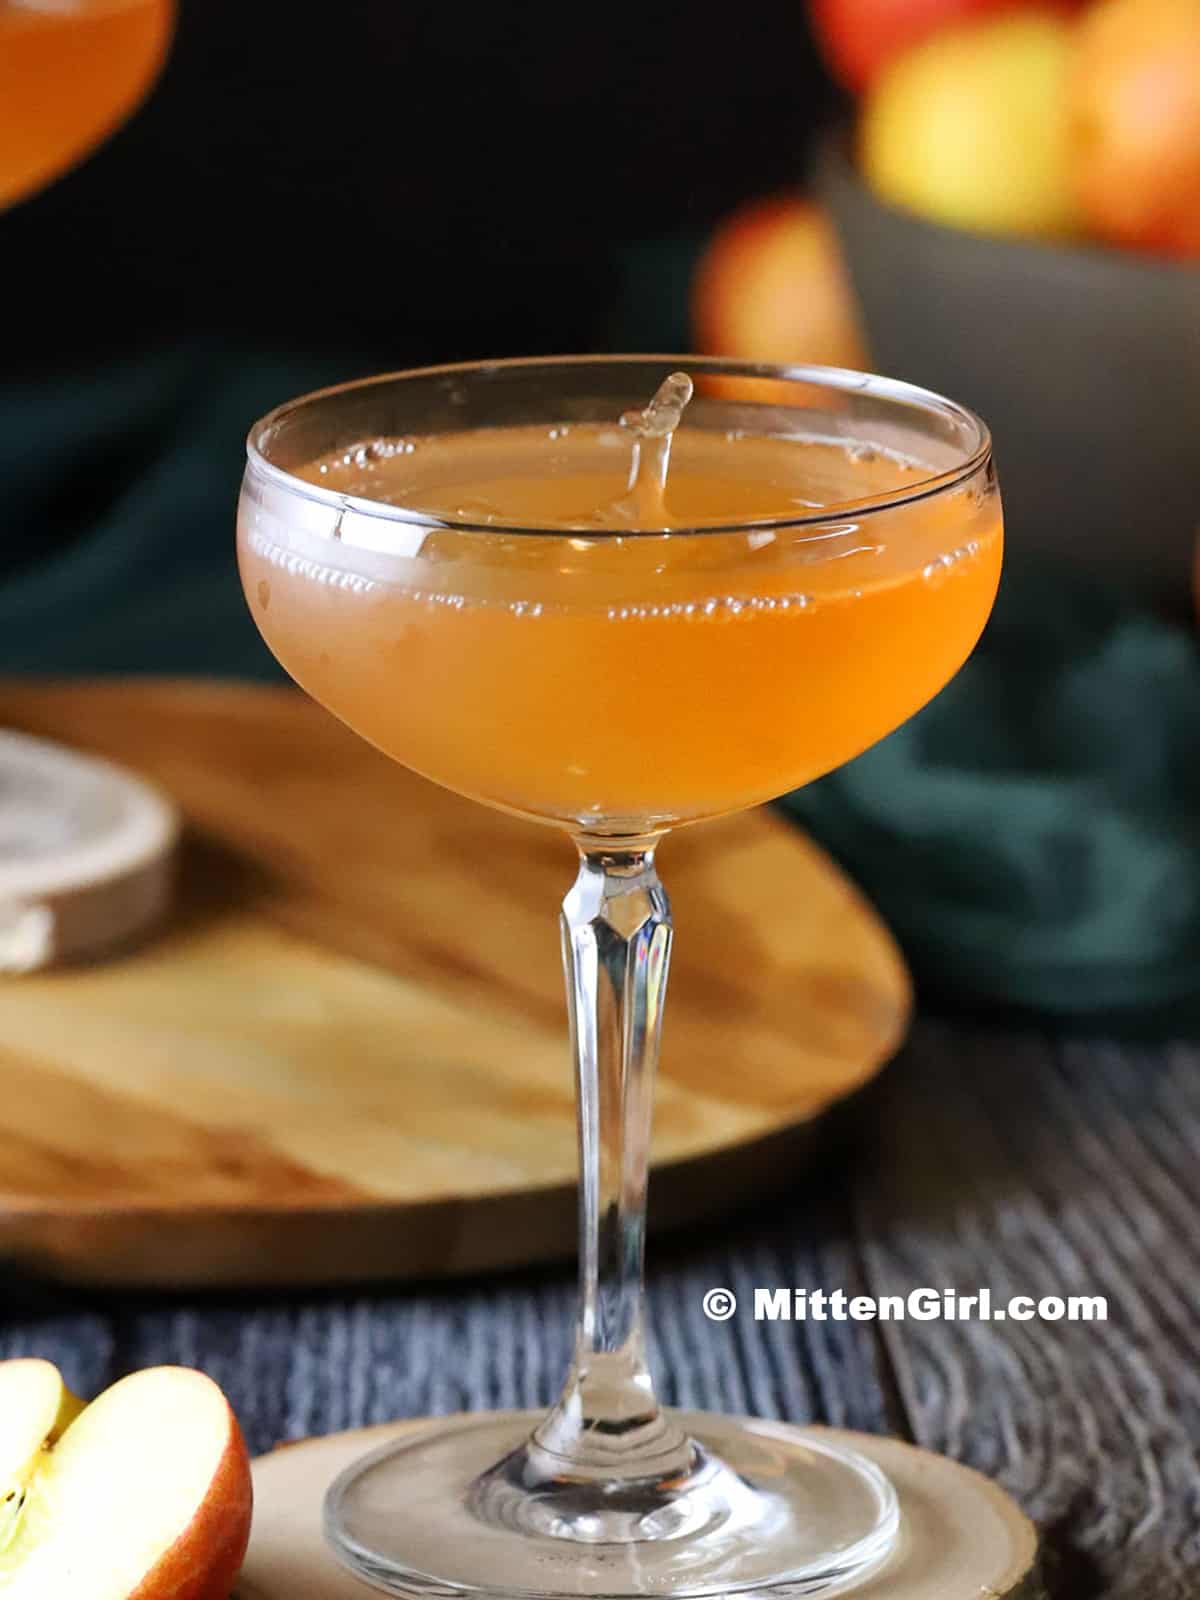 A coupe glass with a splash of cocktail jumping up in it.